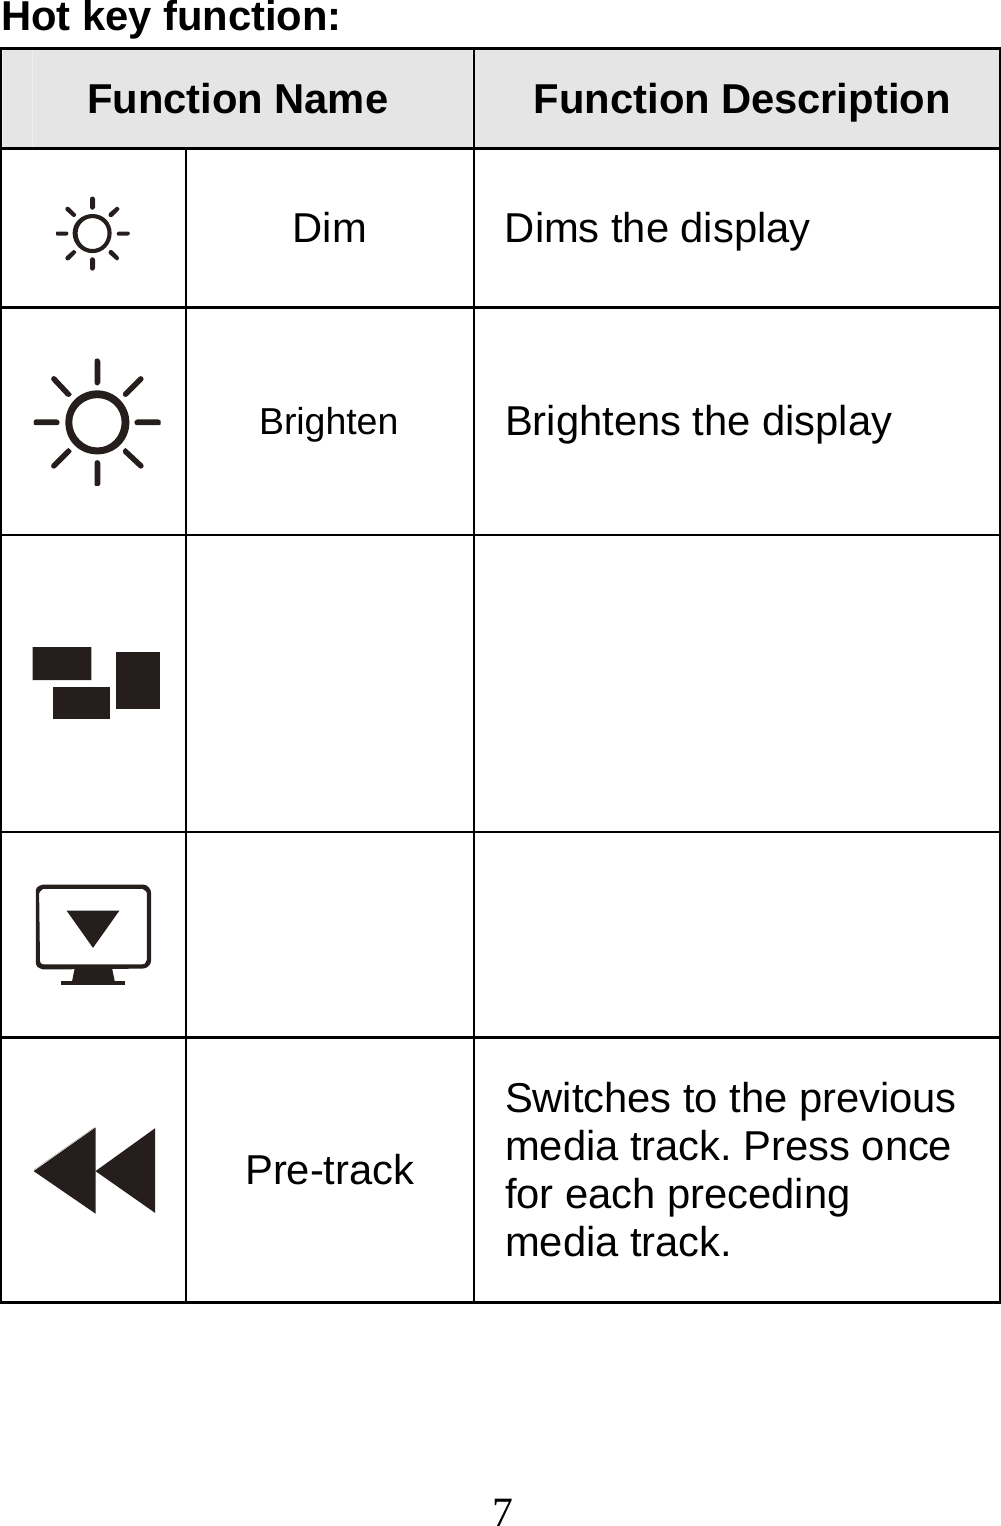  7Hot key function: Function Name  Function Description  Dim  Dims the display      Brighten  Brightens the display        Pre-track Switches to the previous media track. Press once for each preceding media track. 